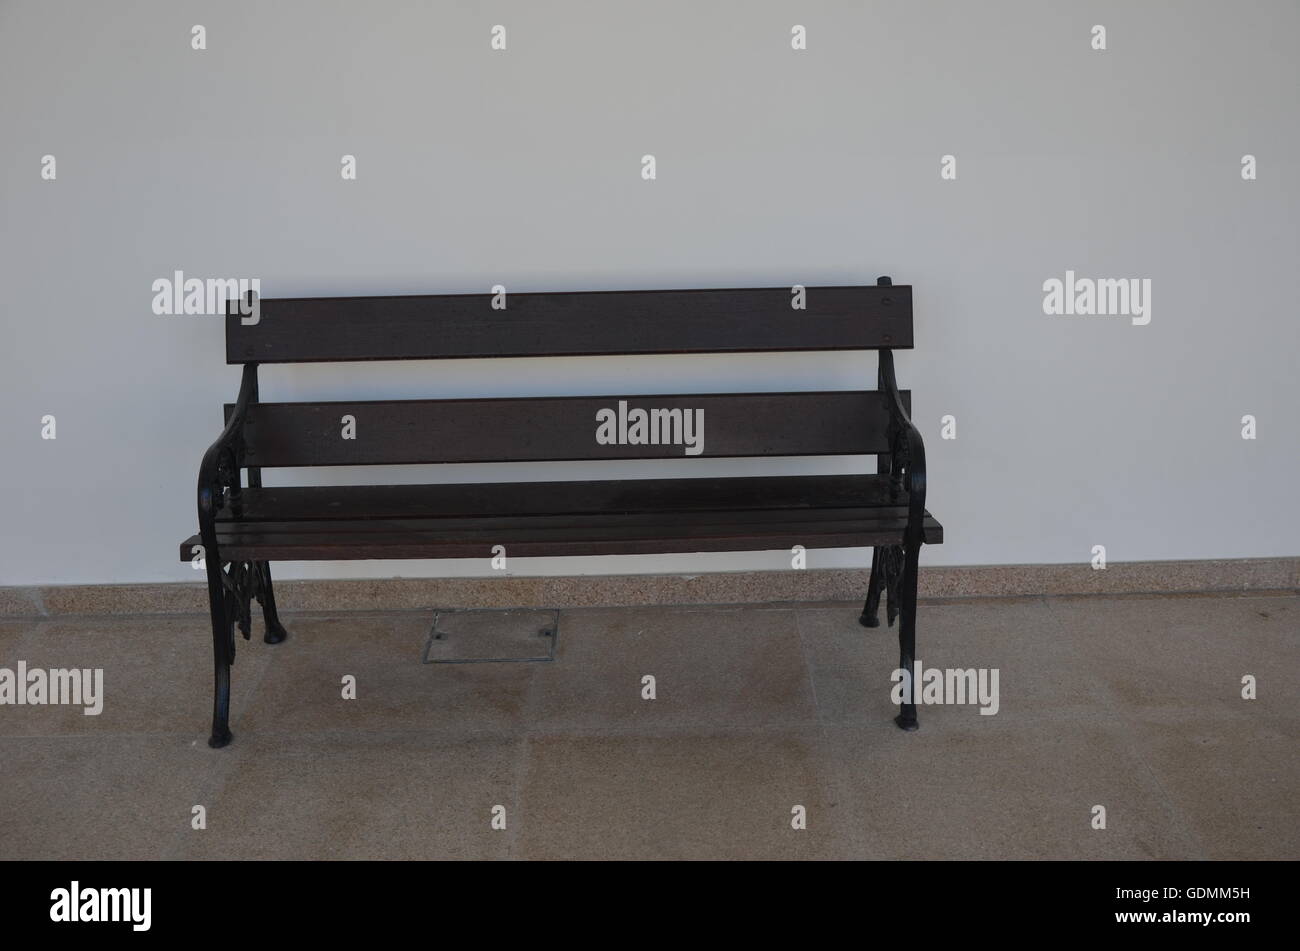 park, bank, wood, metal, vacant, brown, shelf, black, park bench, furniture, lonely, standing, free, abandoned, outdoors, to sit Stock Photo